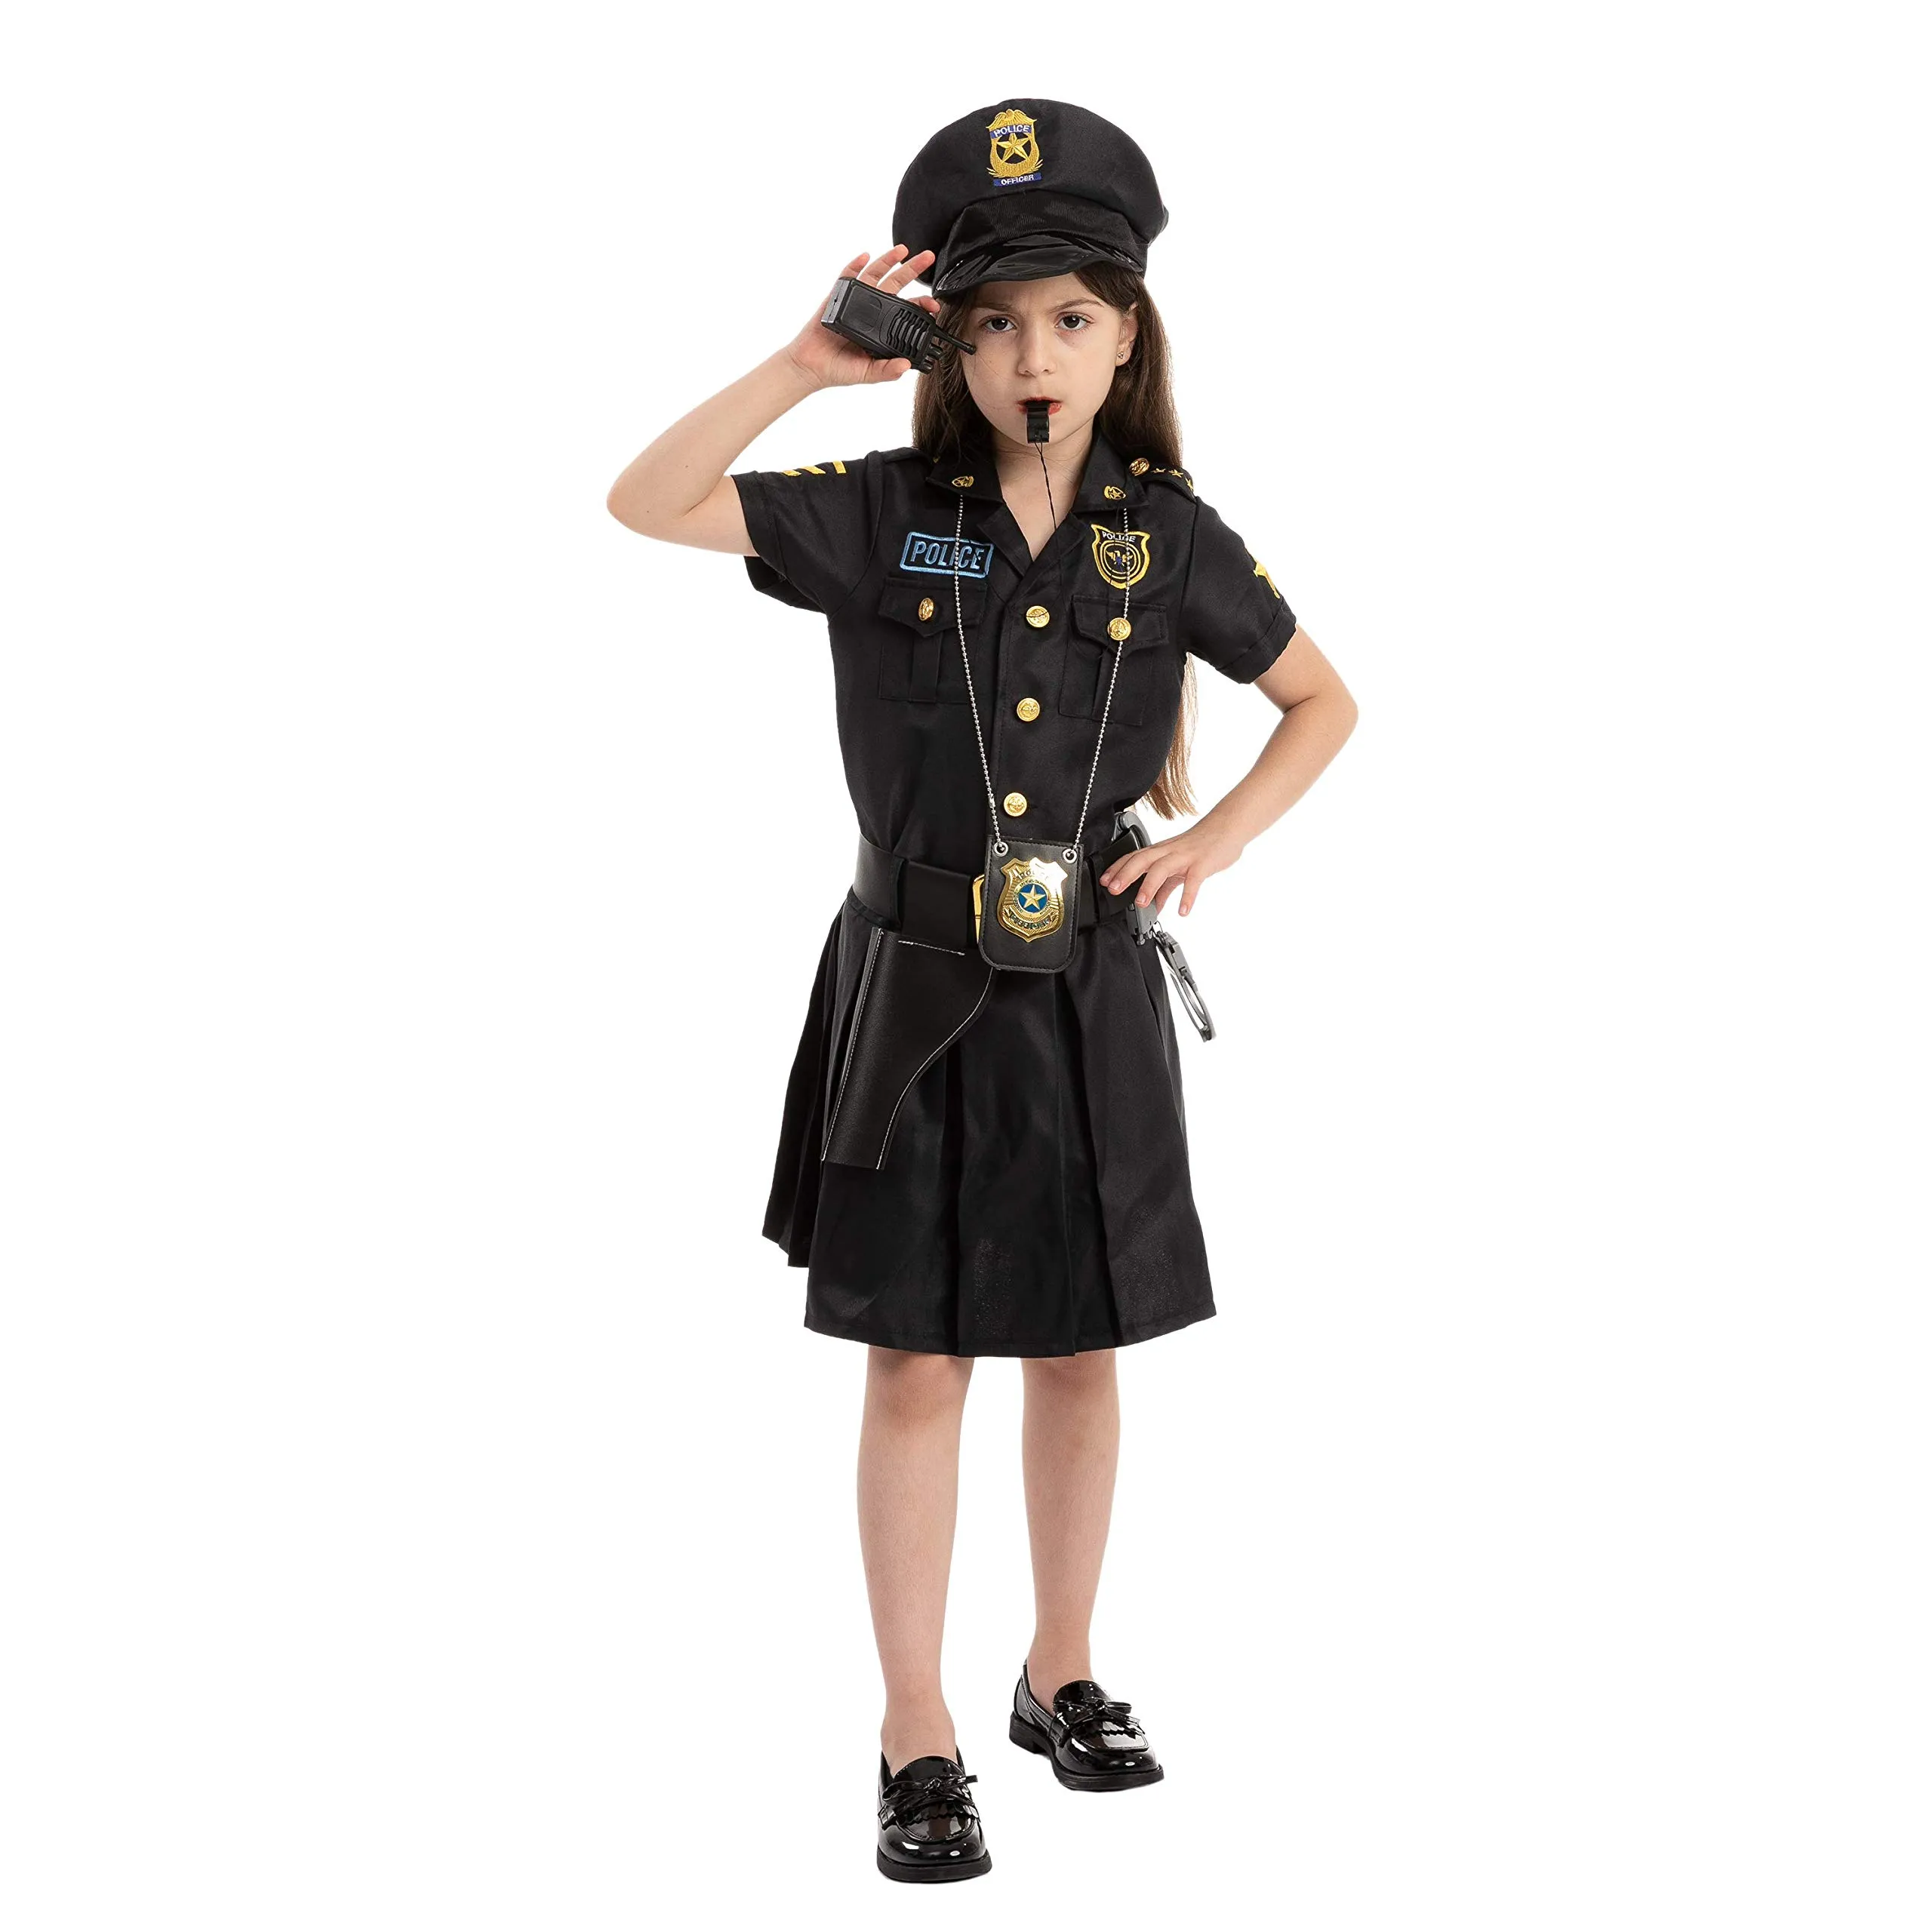 Spooktacular Creations Kids SWAT Costume, SWAT Police Officer Costume for  Boys Halloween Dress Up